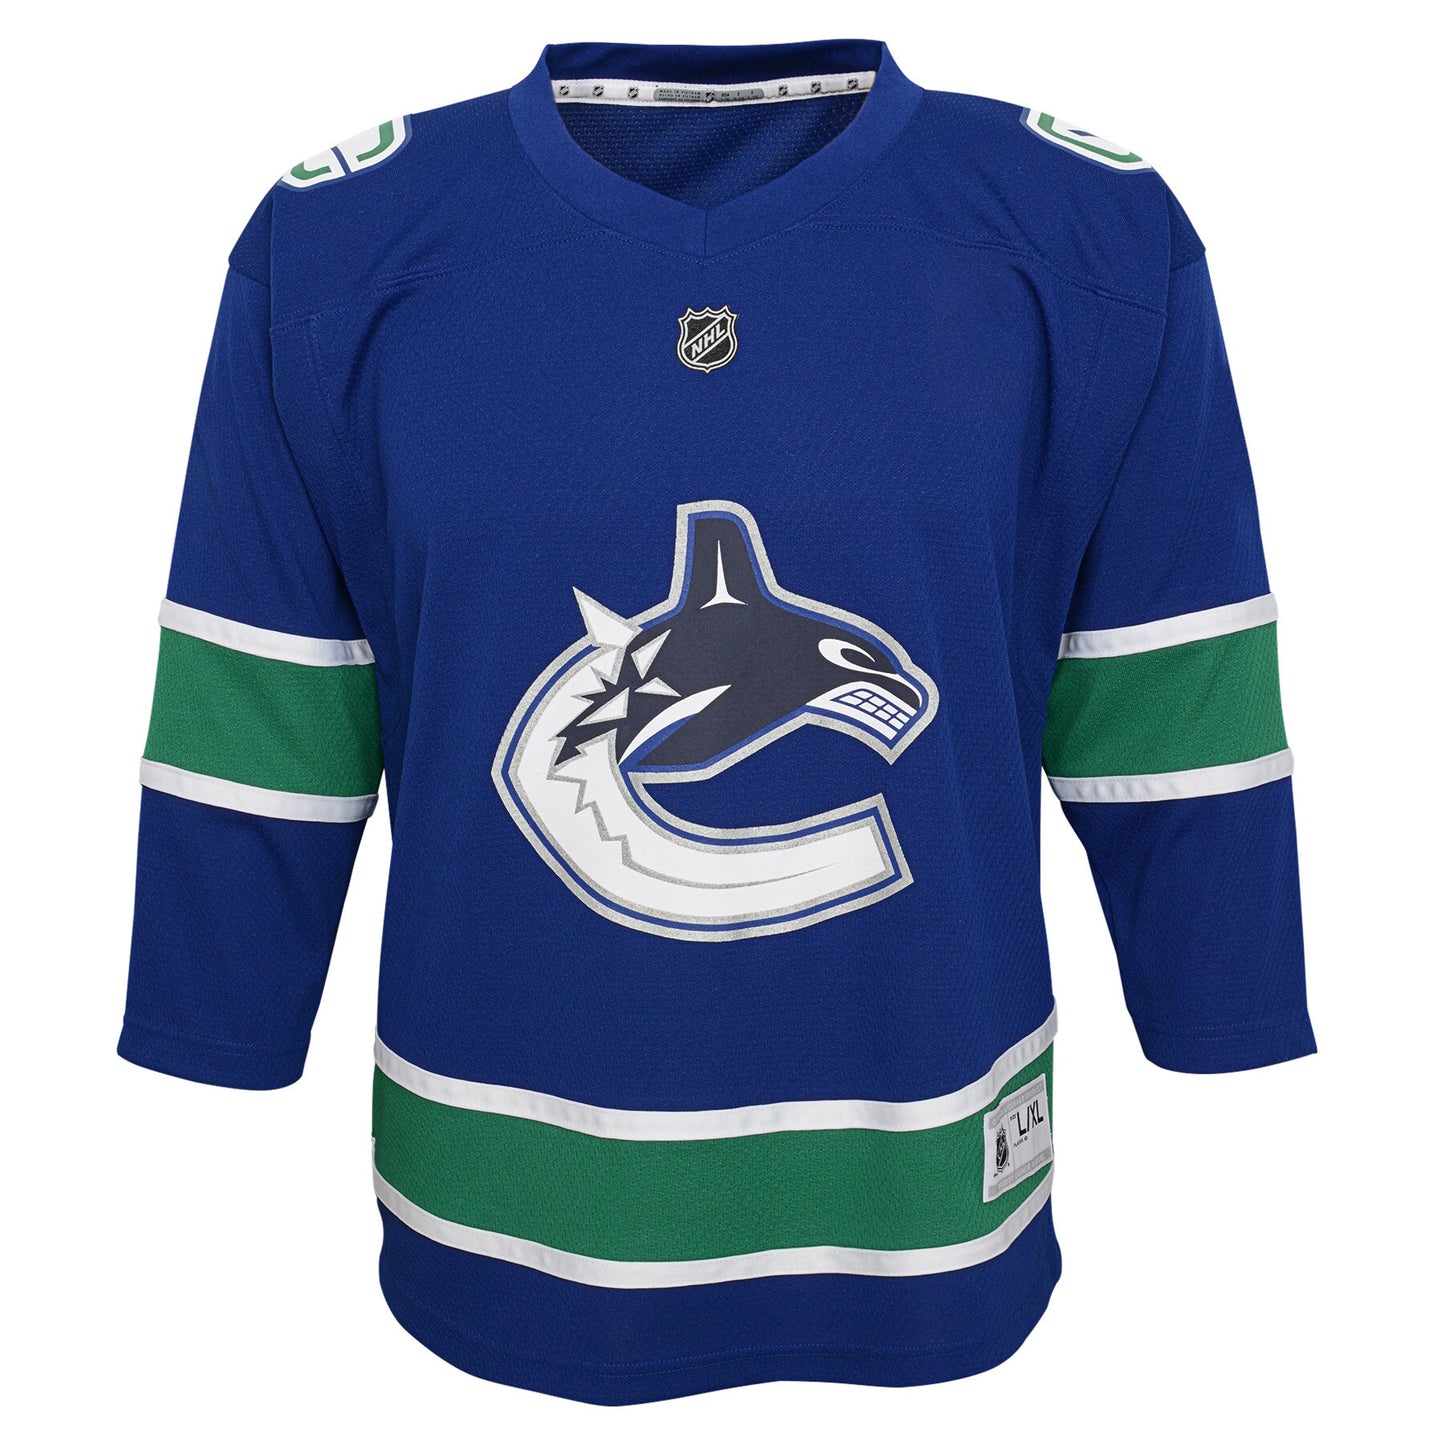 Vancouver Canucks Youth Replica Jersey - Blue